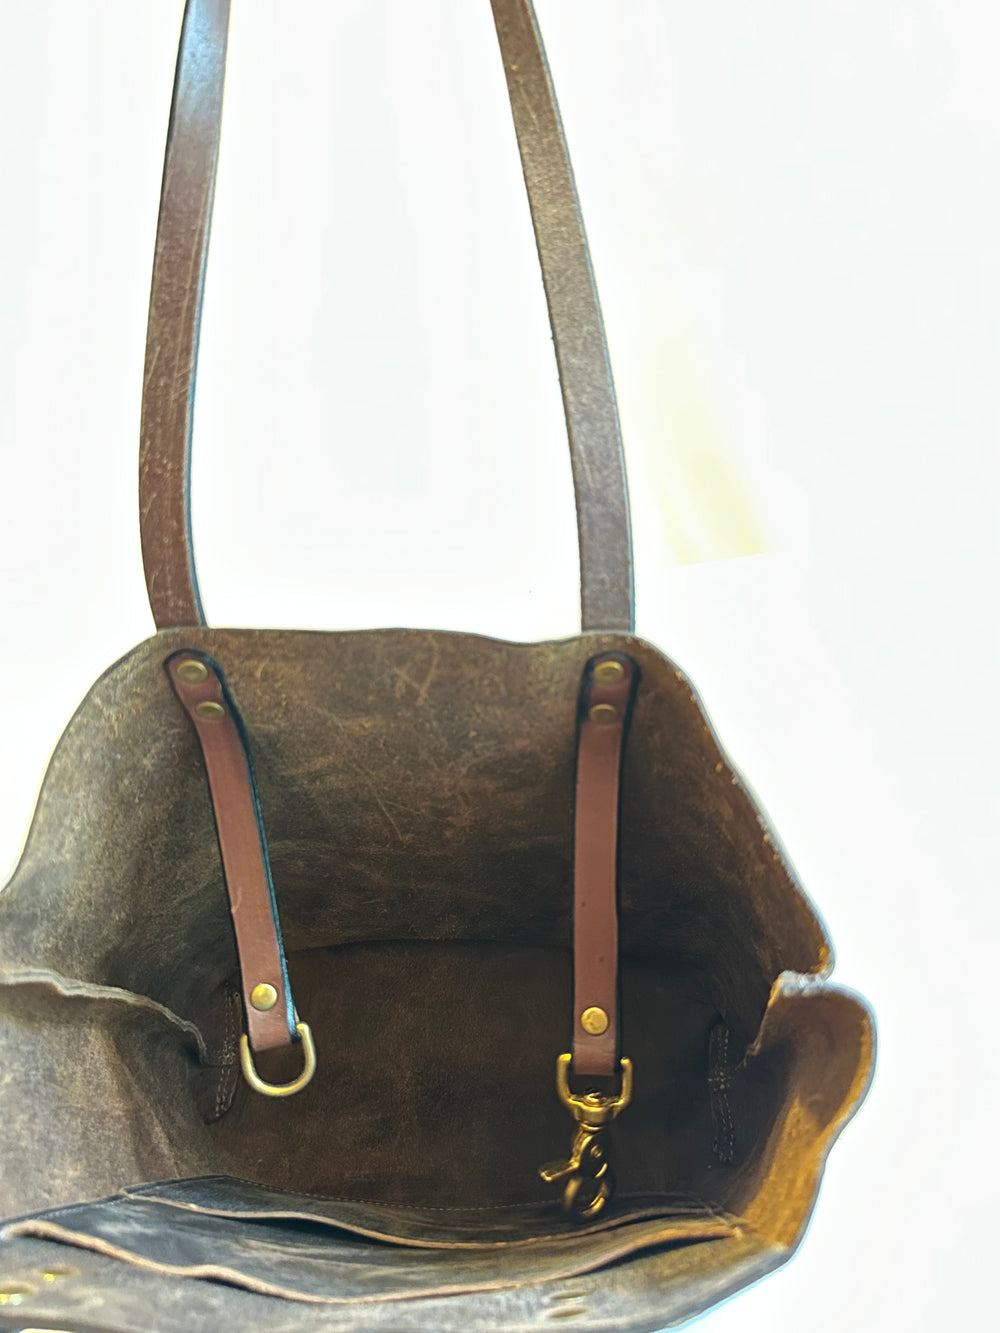 Our handmade Brown Pull Up EDC Mini Leather Tote Bag is hand crafted in our Asheville, NC studio.  It is our compact tote that can carry anything from top secret dossiers to mini bottles for apres-anything.  Made from the highest quality top grain, solid leather, this bag will outlast your sister's second and third marriages.